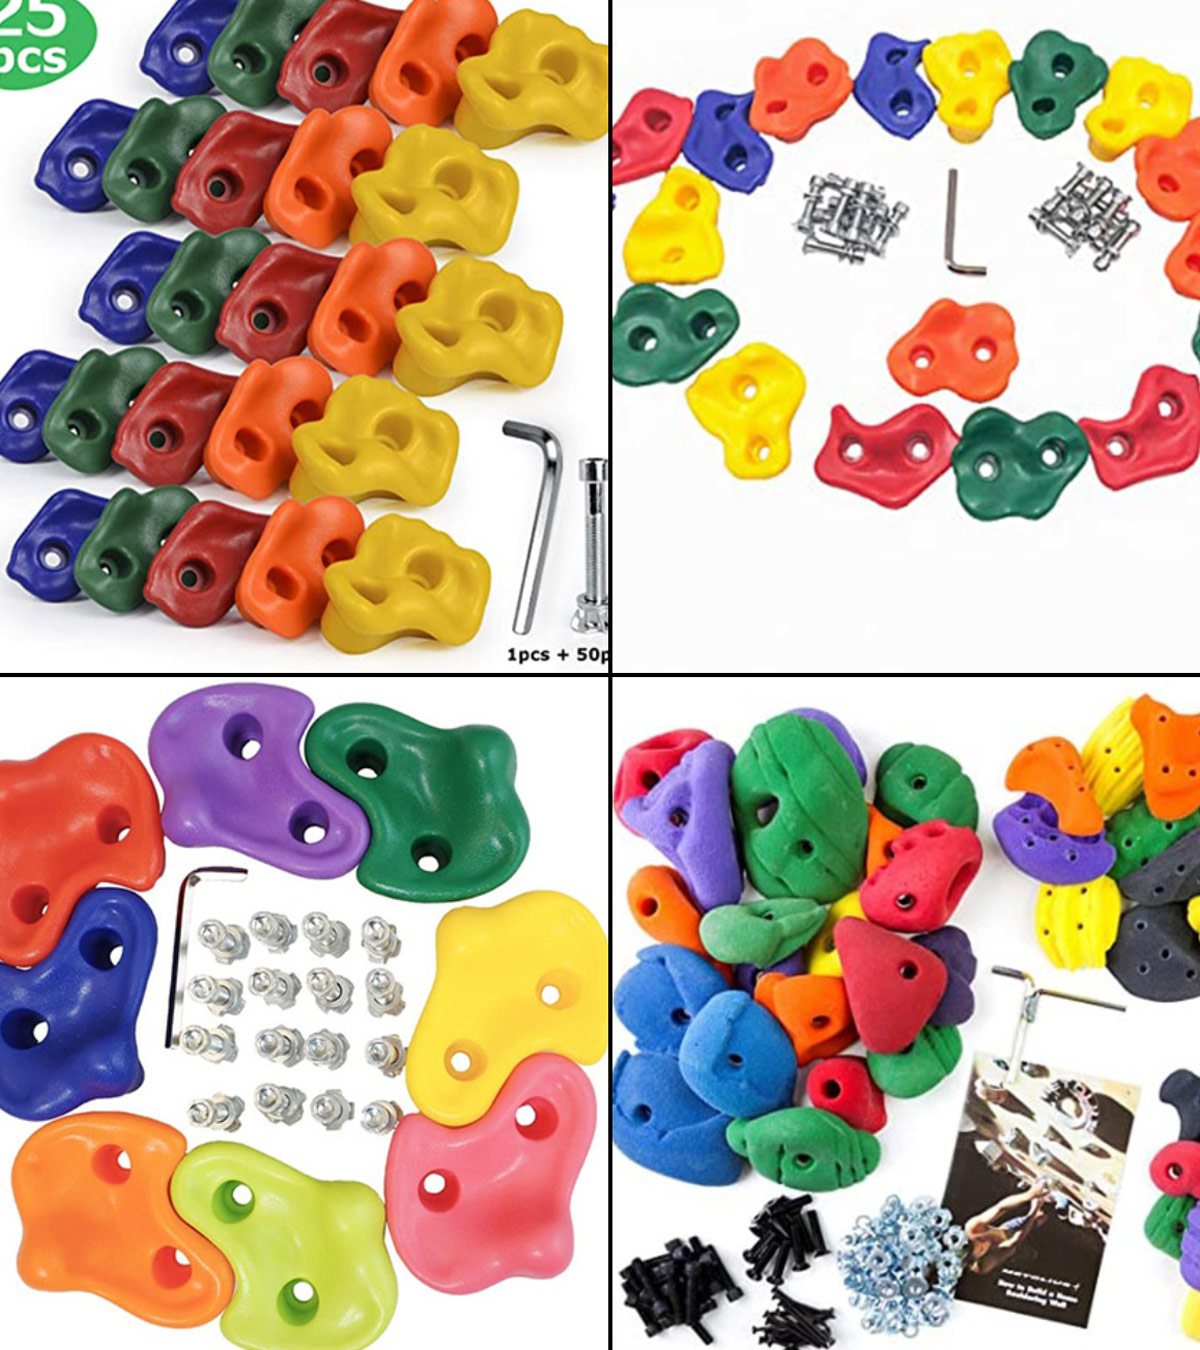 15 or 20 Childrens climbing holds climbing rocks for climbing wall varied includes mounting material Colour:Mixed Colours ALPIDEX 5 10 Packing Unit:30 pieces 